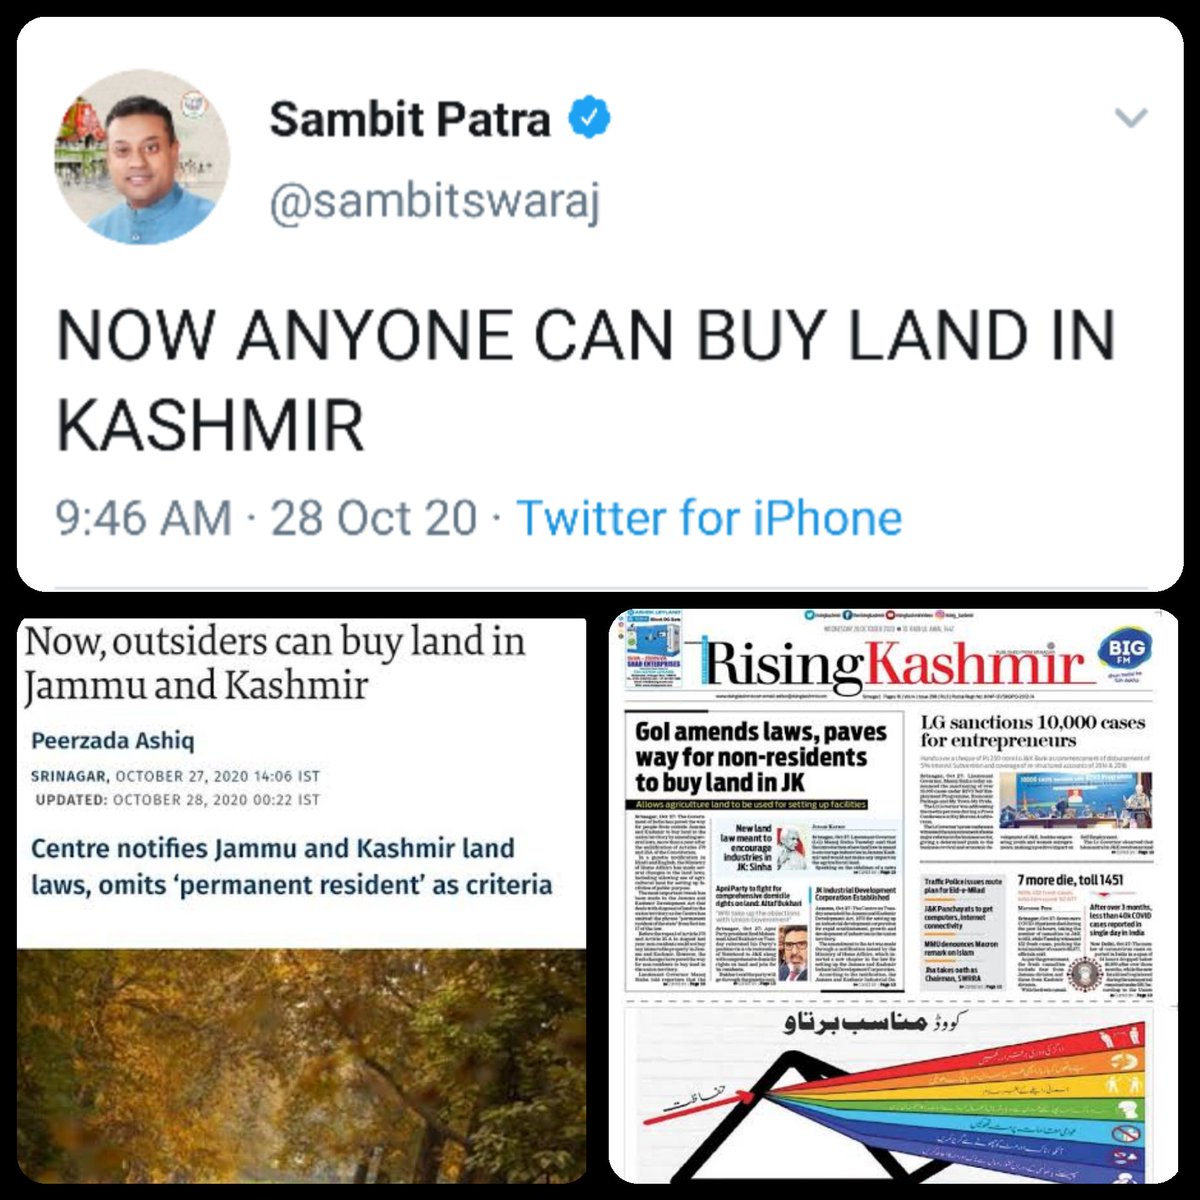 THE HYPOCRISY OF  @RSSorg RE: J & K.Taking a detour in the series. To be honest, forced by the chatter in the RW ecosystem. It's either "Welcome to J&K" or "Now we can buy land in J&K". It's wrong at so many levels. First, J&K, till the other day, wasn't the only piece of land+